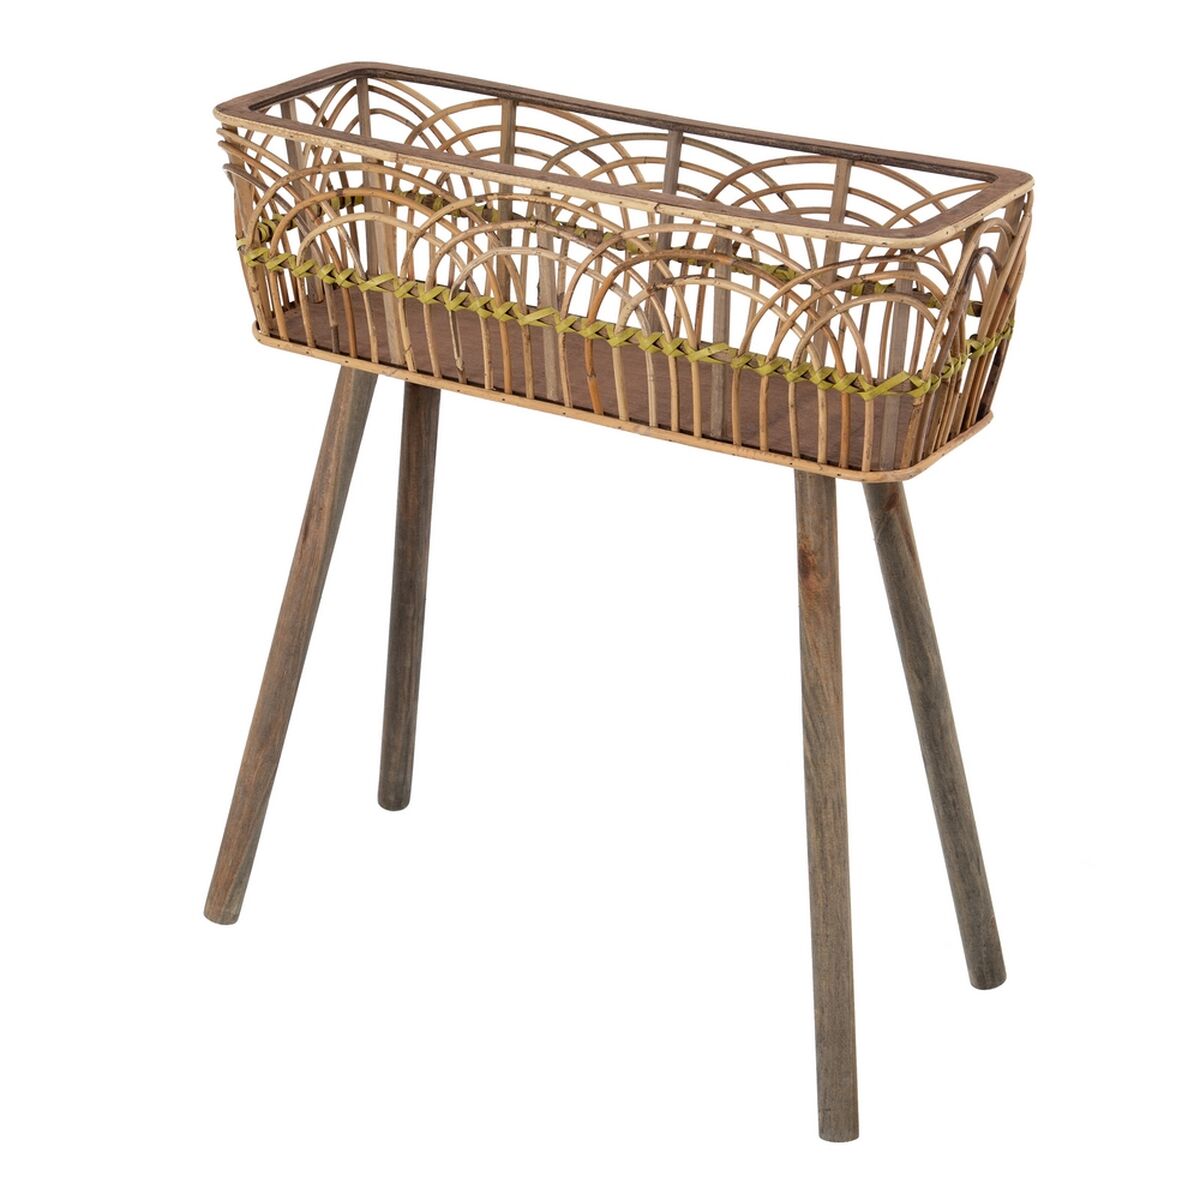 Planter in Wood Bamboo (60 x 21 x 68 cm)